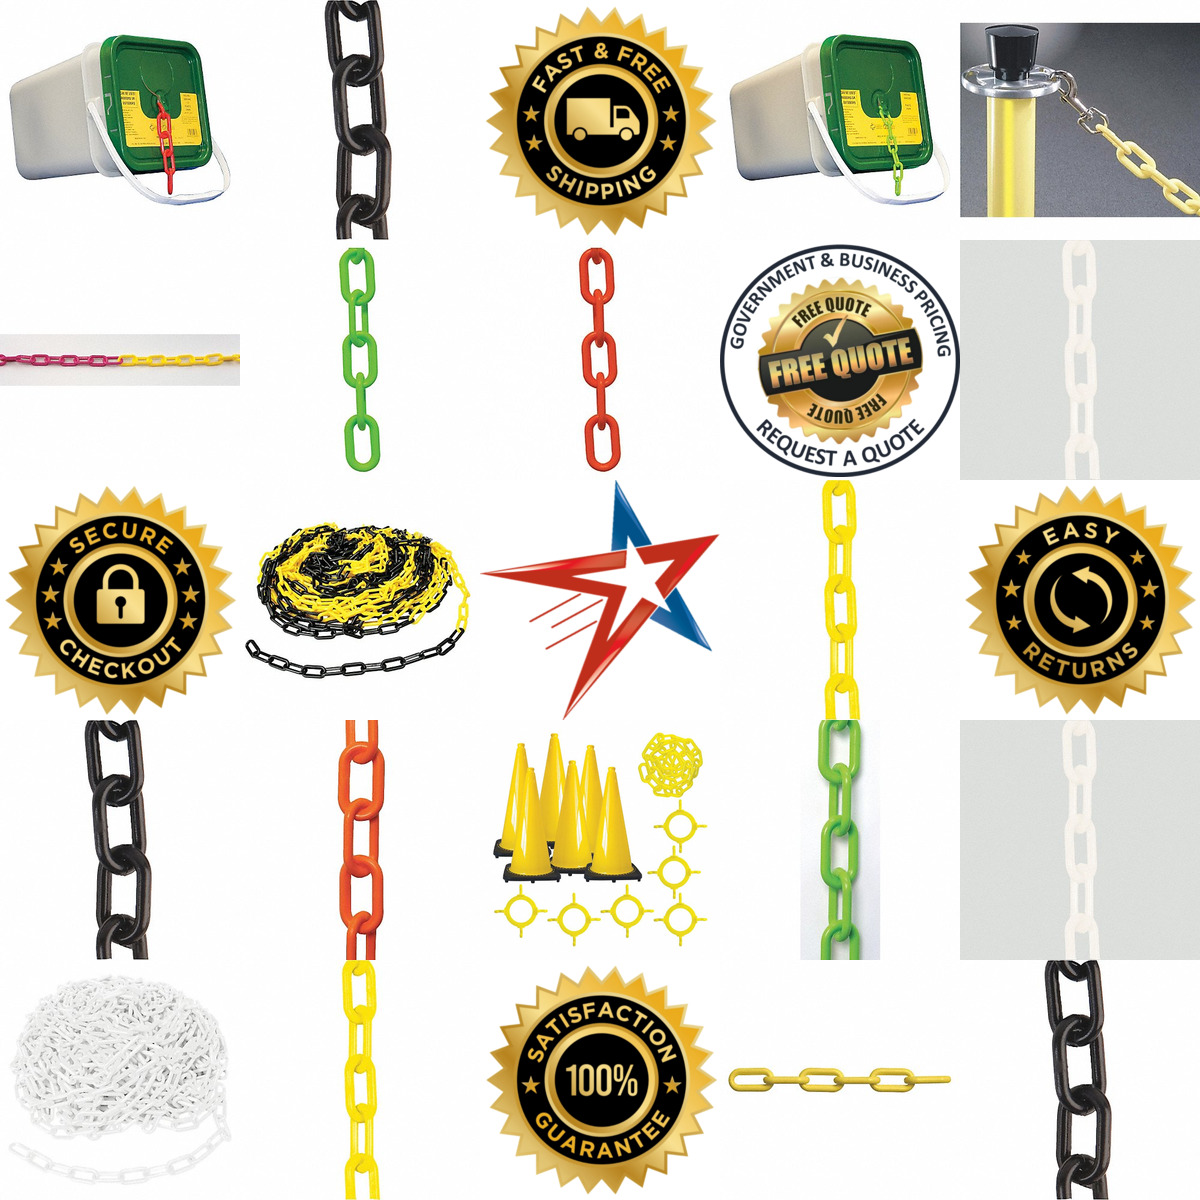 A selection of Plastic Chain Barriers products on GoVets